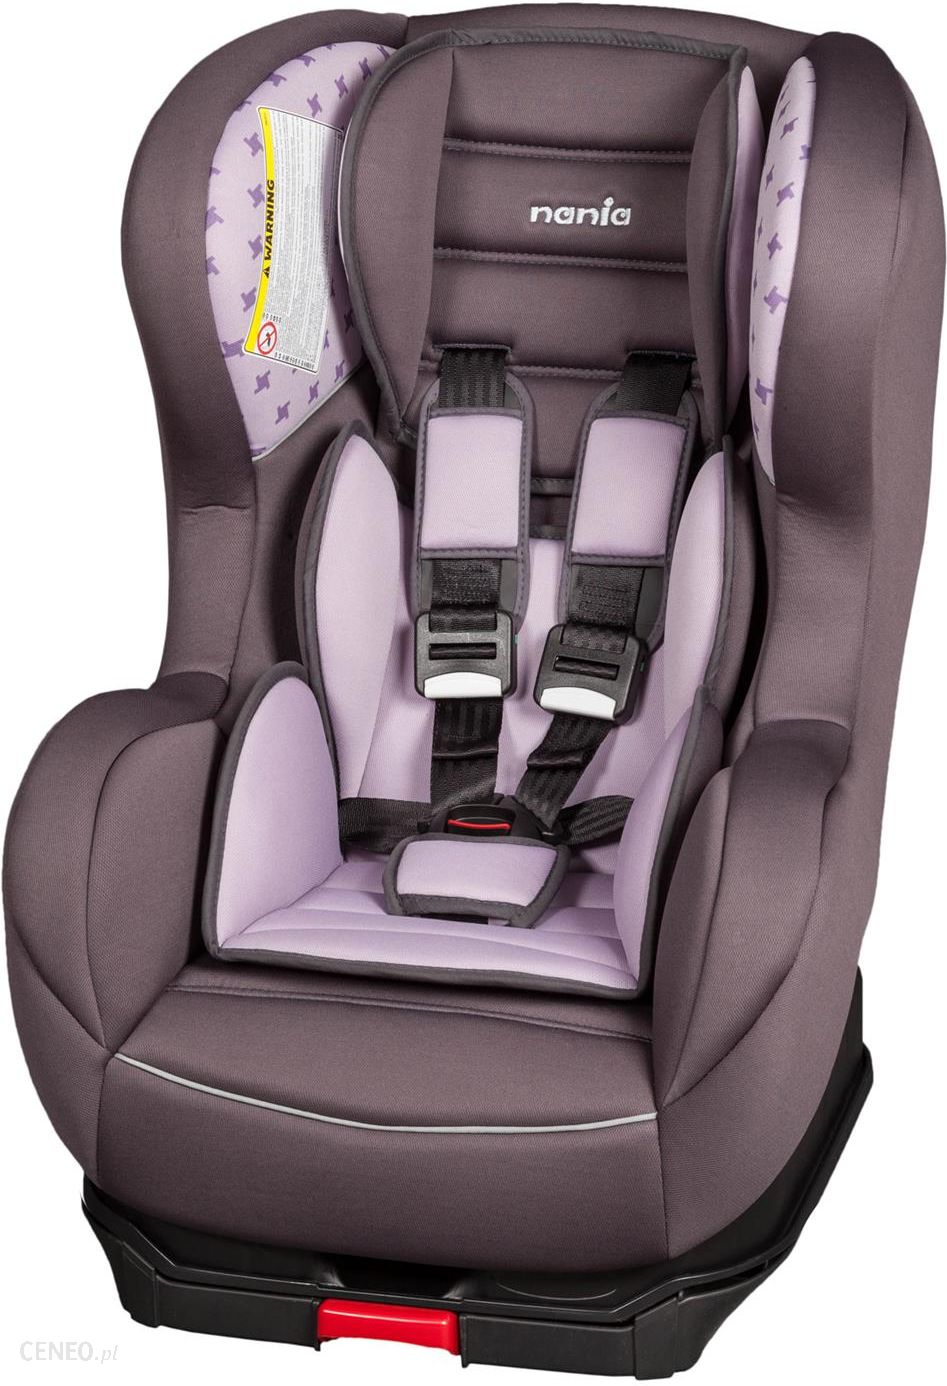 Nania cosmo car seat instructions